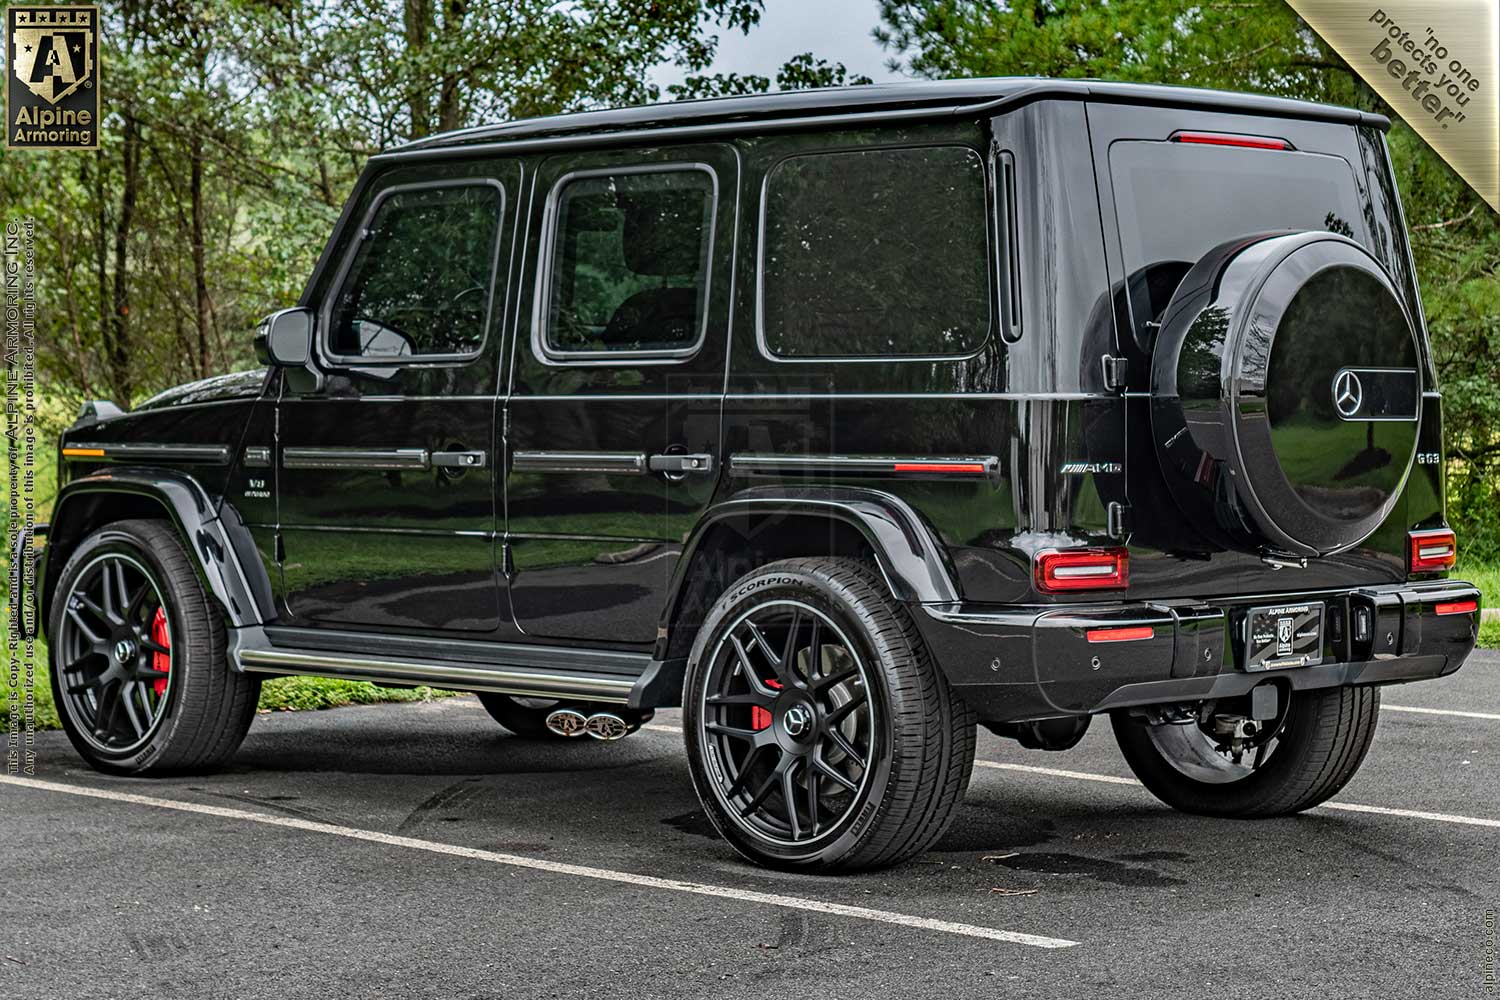 New Inventory Armored Mercedes-Benz G63 Level A9/B6+ Exterior & Interior Images VIN:5920